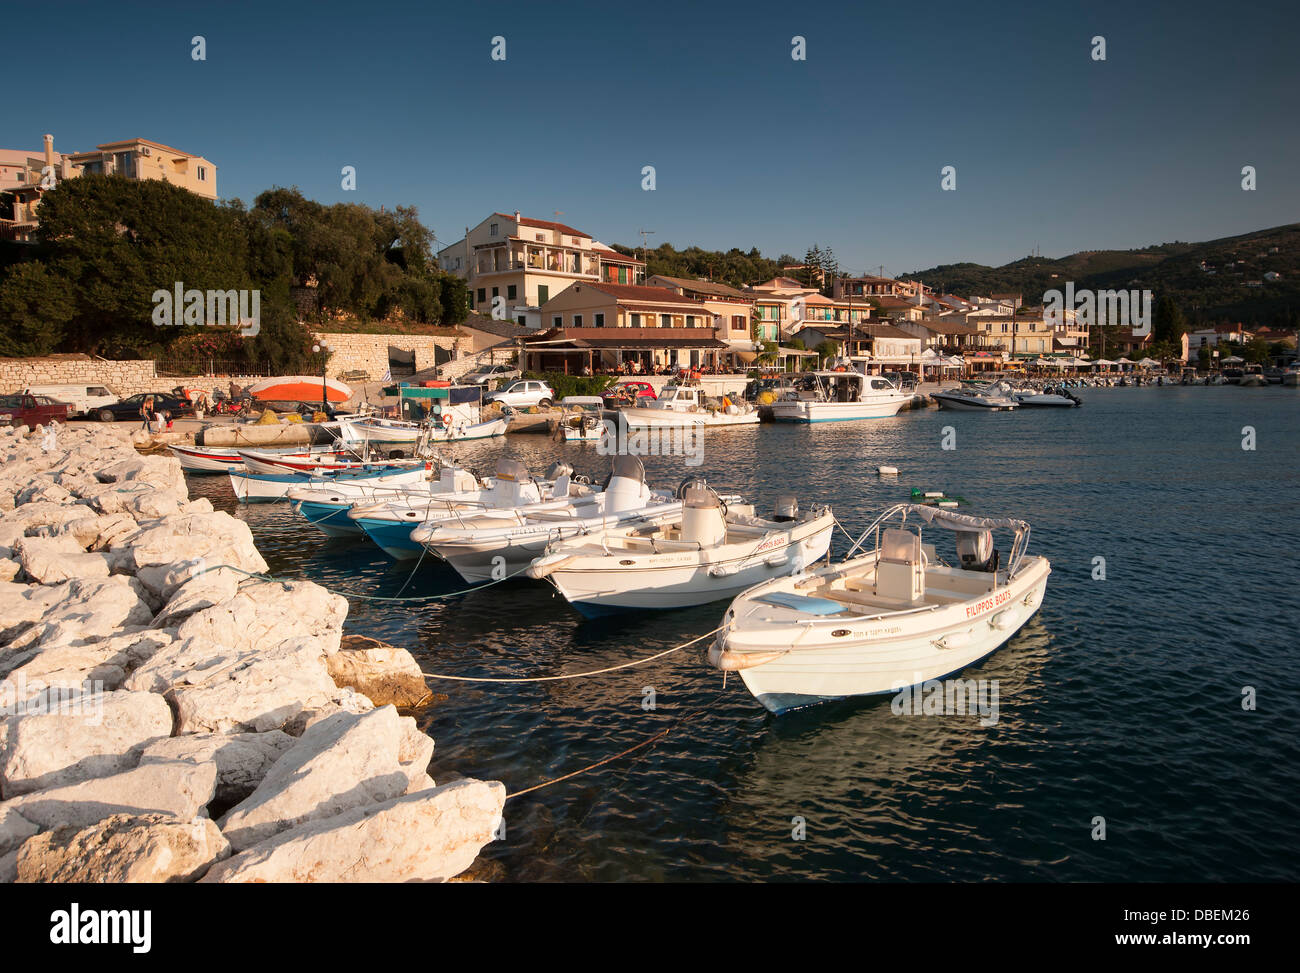 Boats moored at Kassiopi harbour in Corfu, Greece Stock Photo